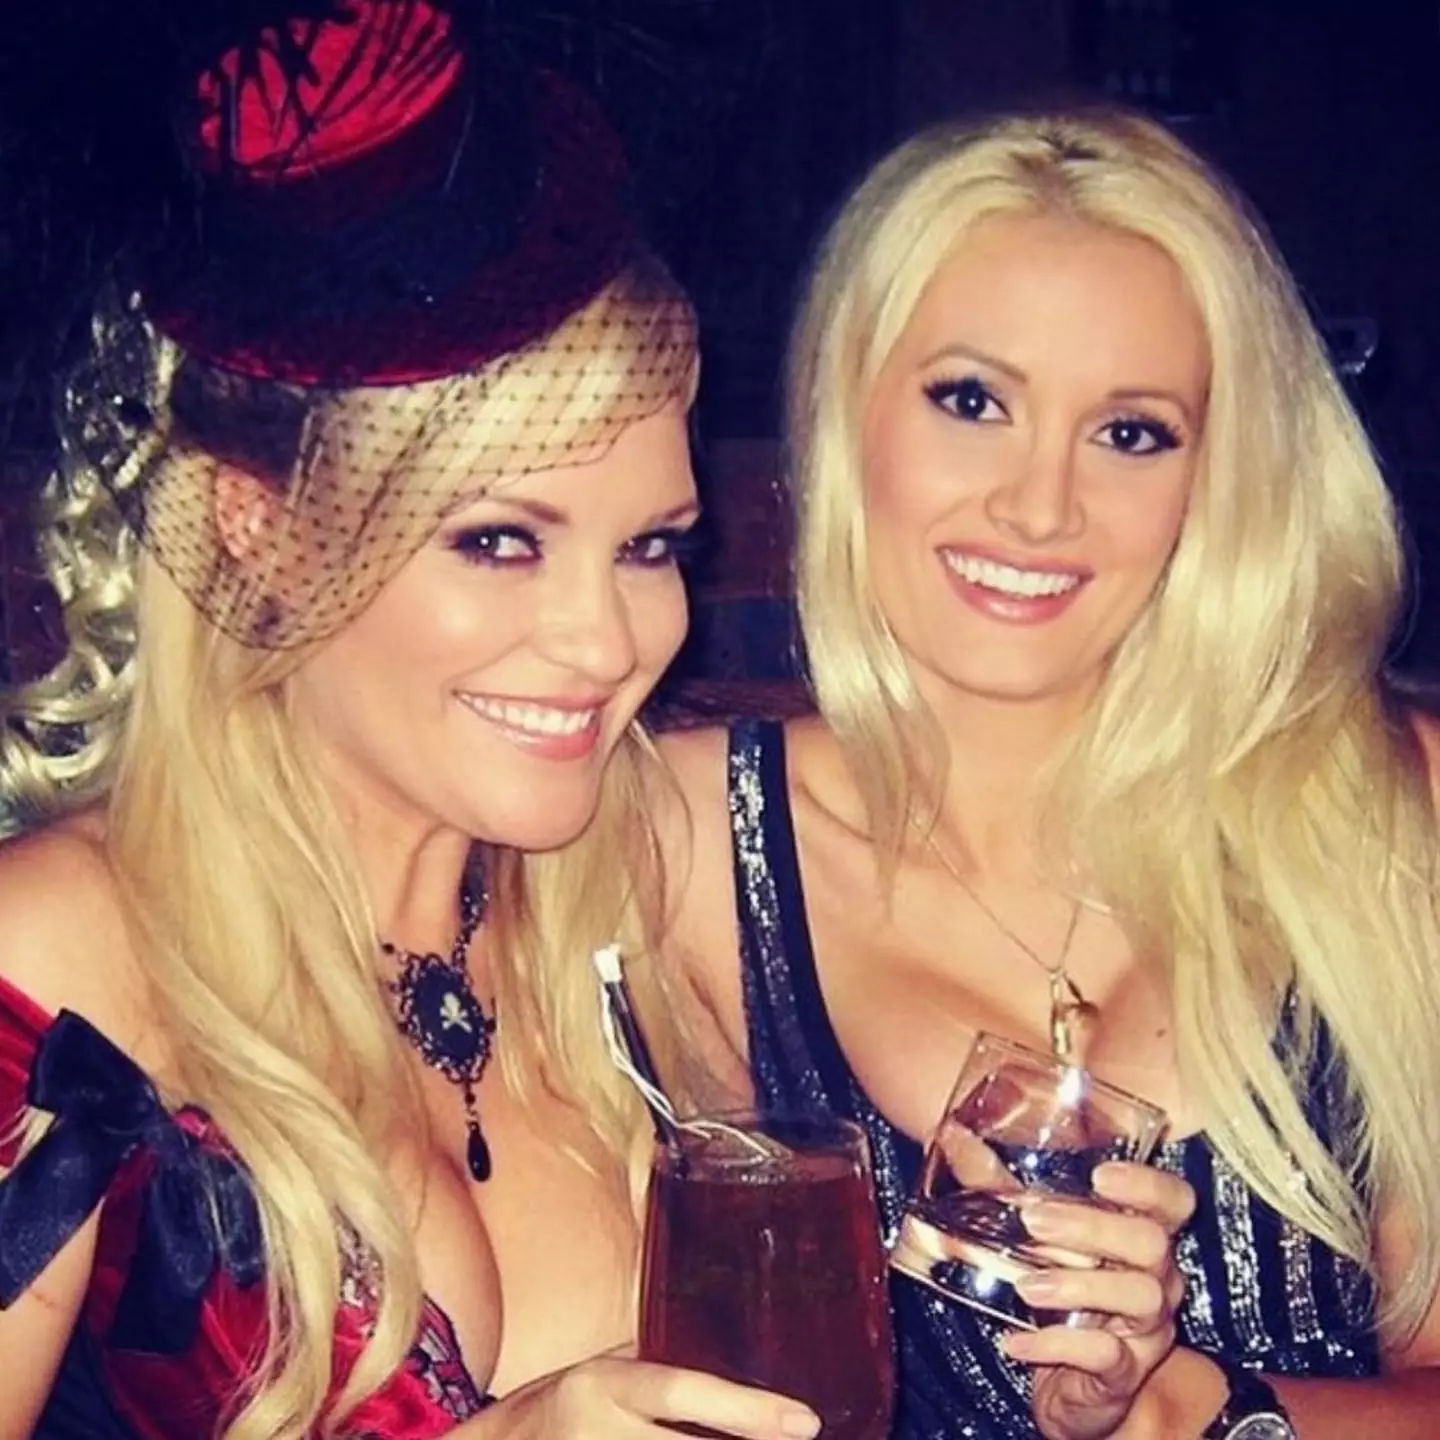 The former Playmates speak about their time with Hefner in their podcast, Girls Next Level.